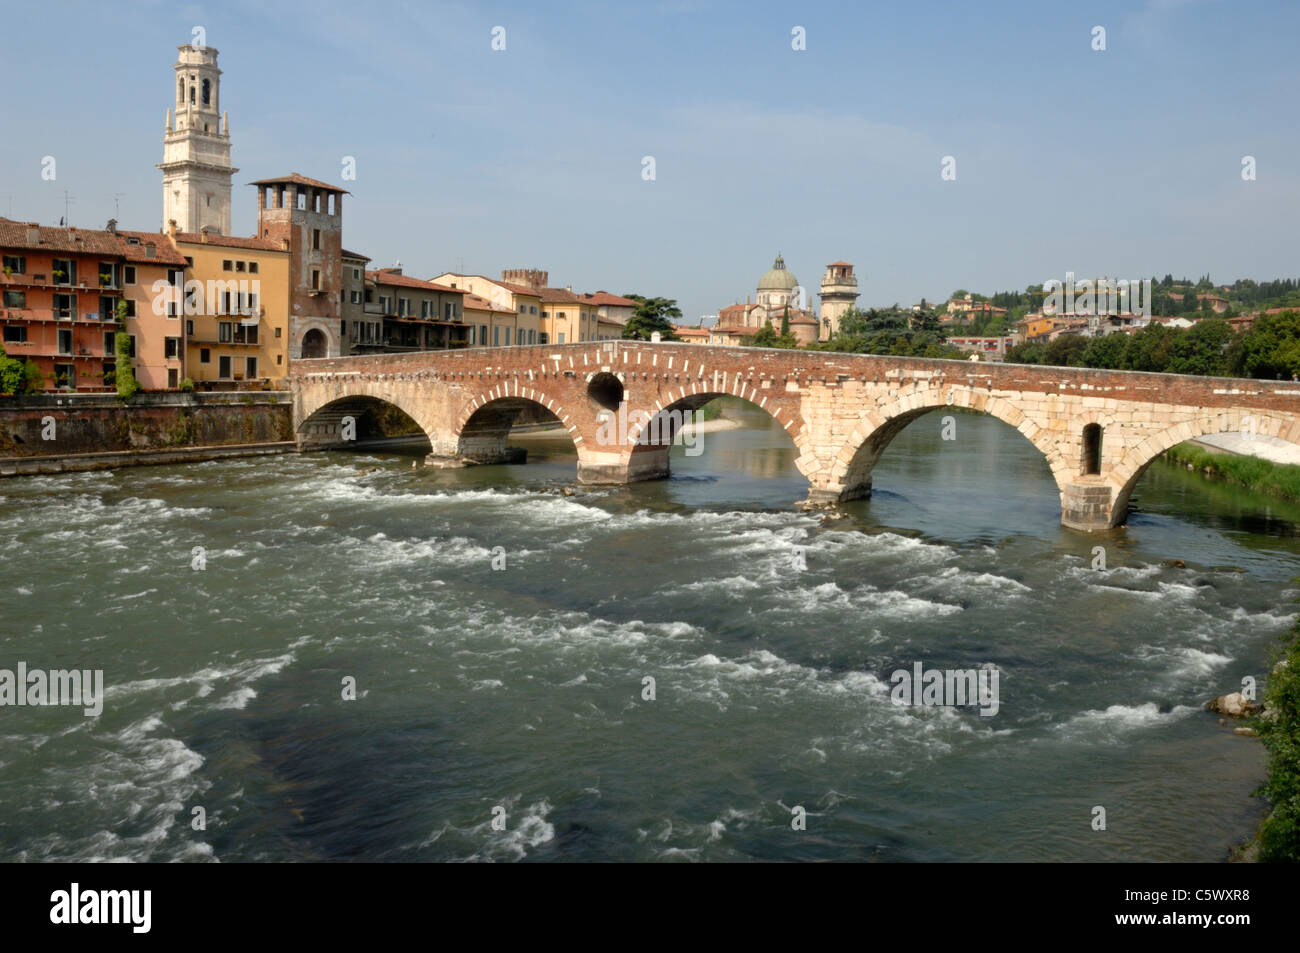 The bell tower of the duomo and Ponte Pietra on the Fiume Adige in Verona Stock Photo